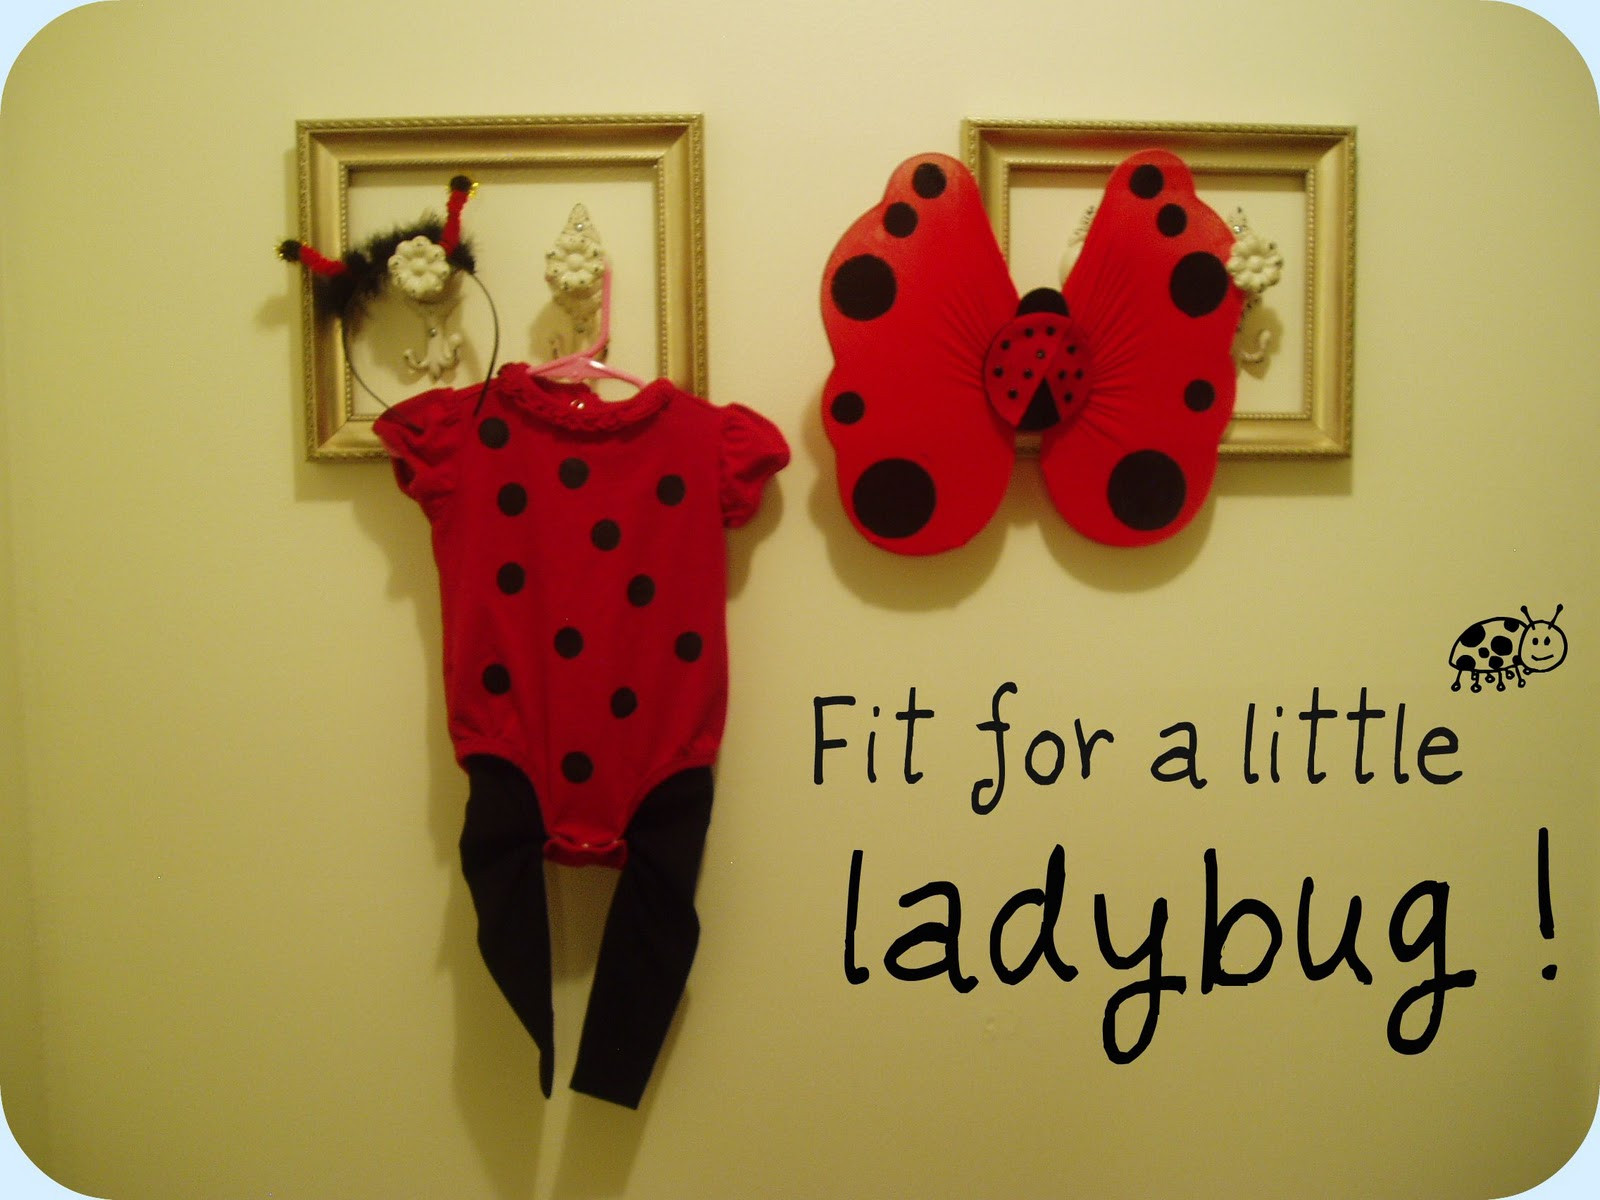 DIY Ladybug Costumes
 Spartan Living Homemade Toddler Costume Fit for a